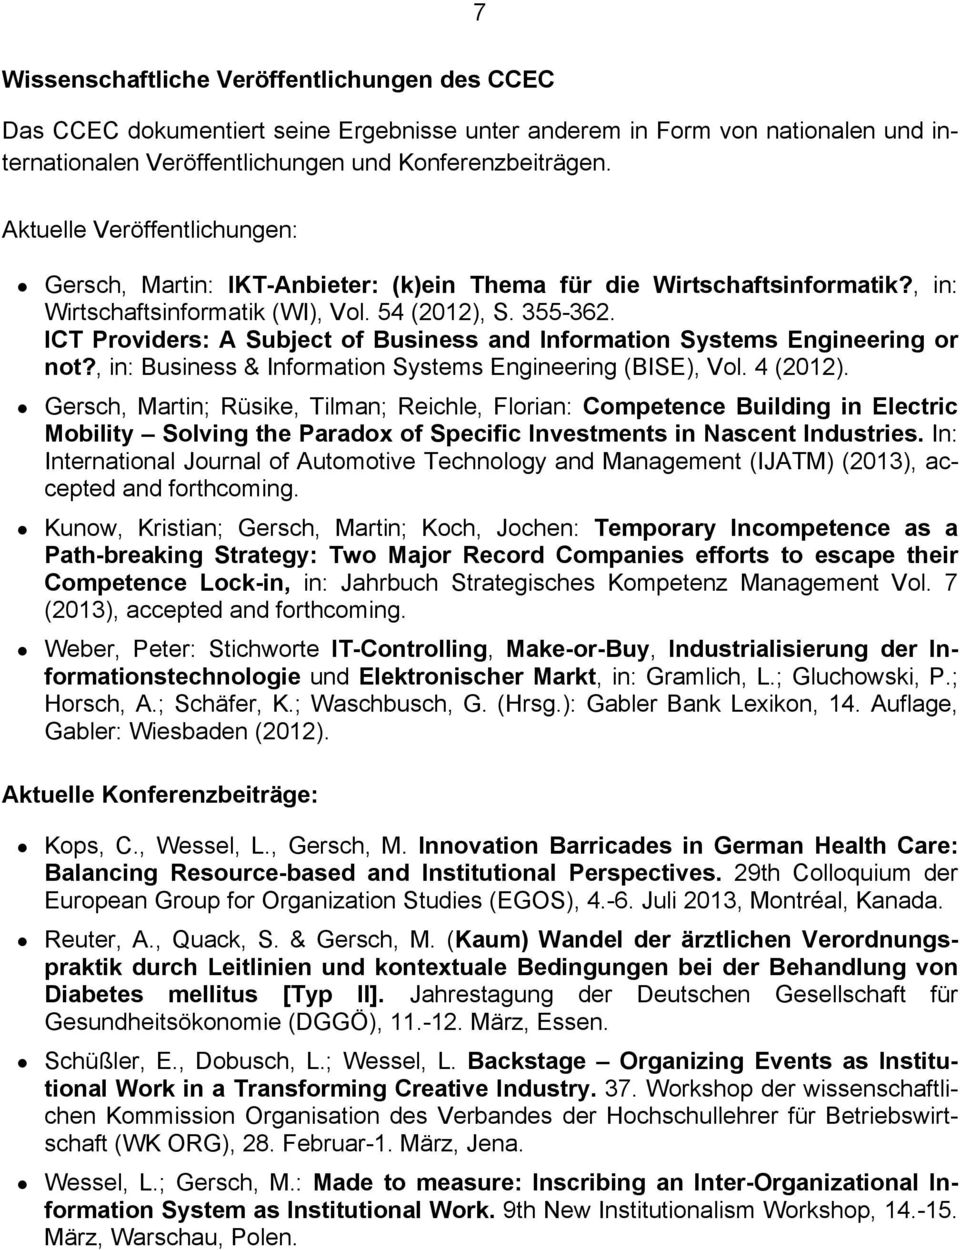 ICT Providers: A Subject of Business and Information Systems Engineering or not?, in: Business & Information Systems Engineering (BISE), Vol. 4 (2012).